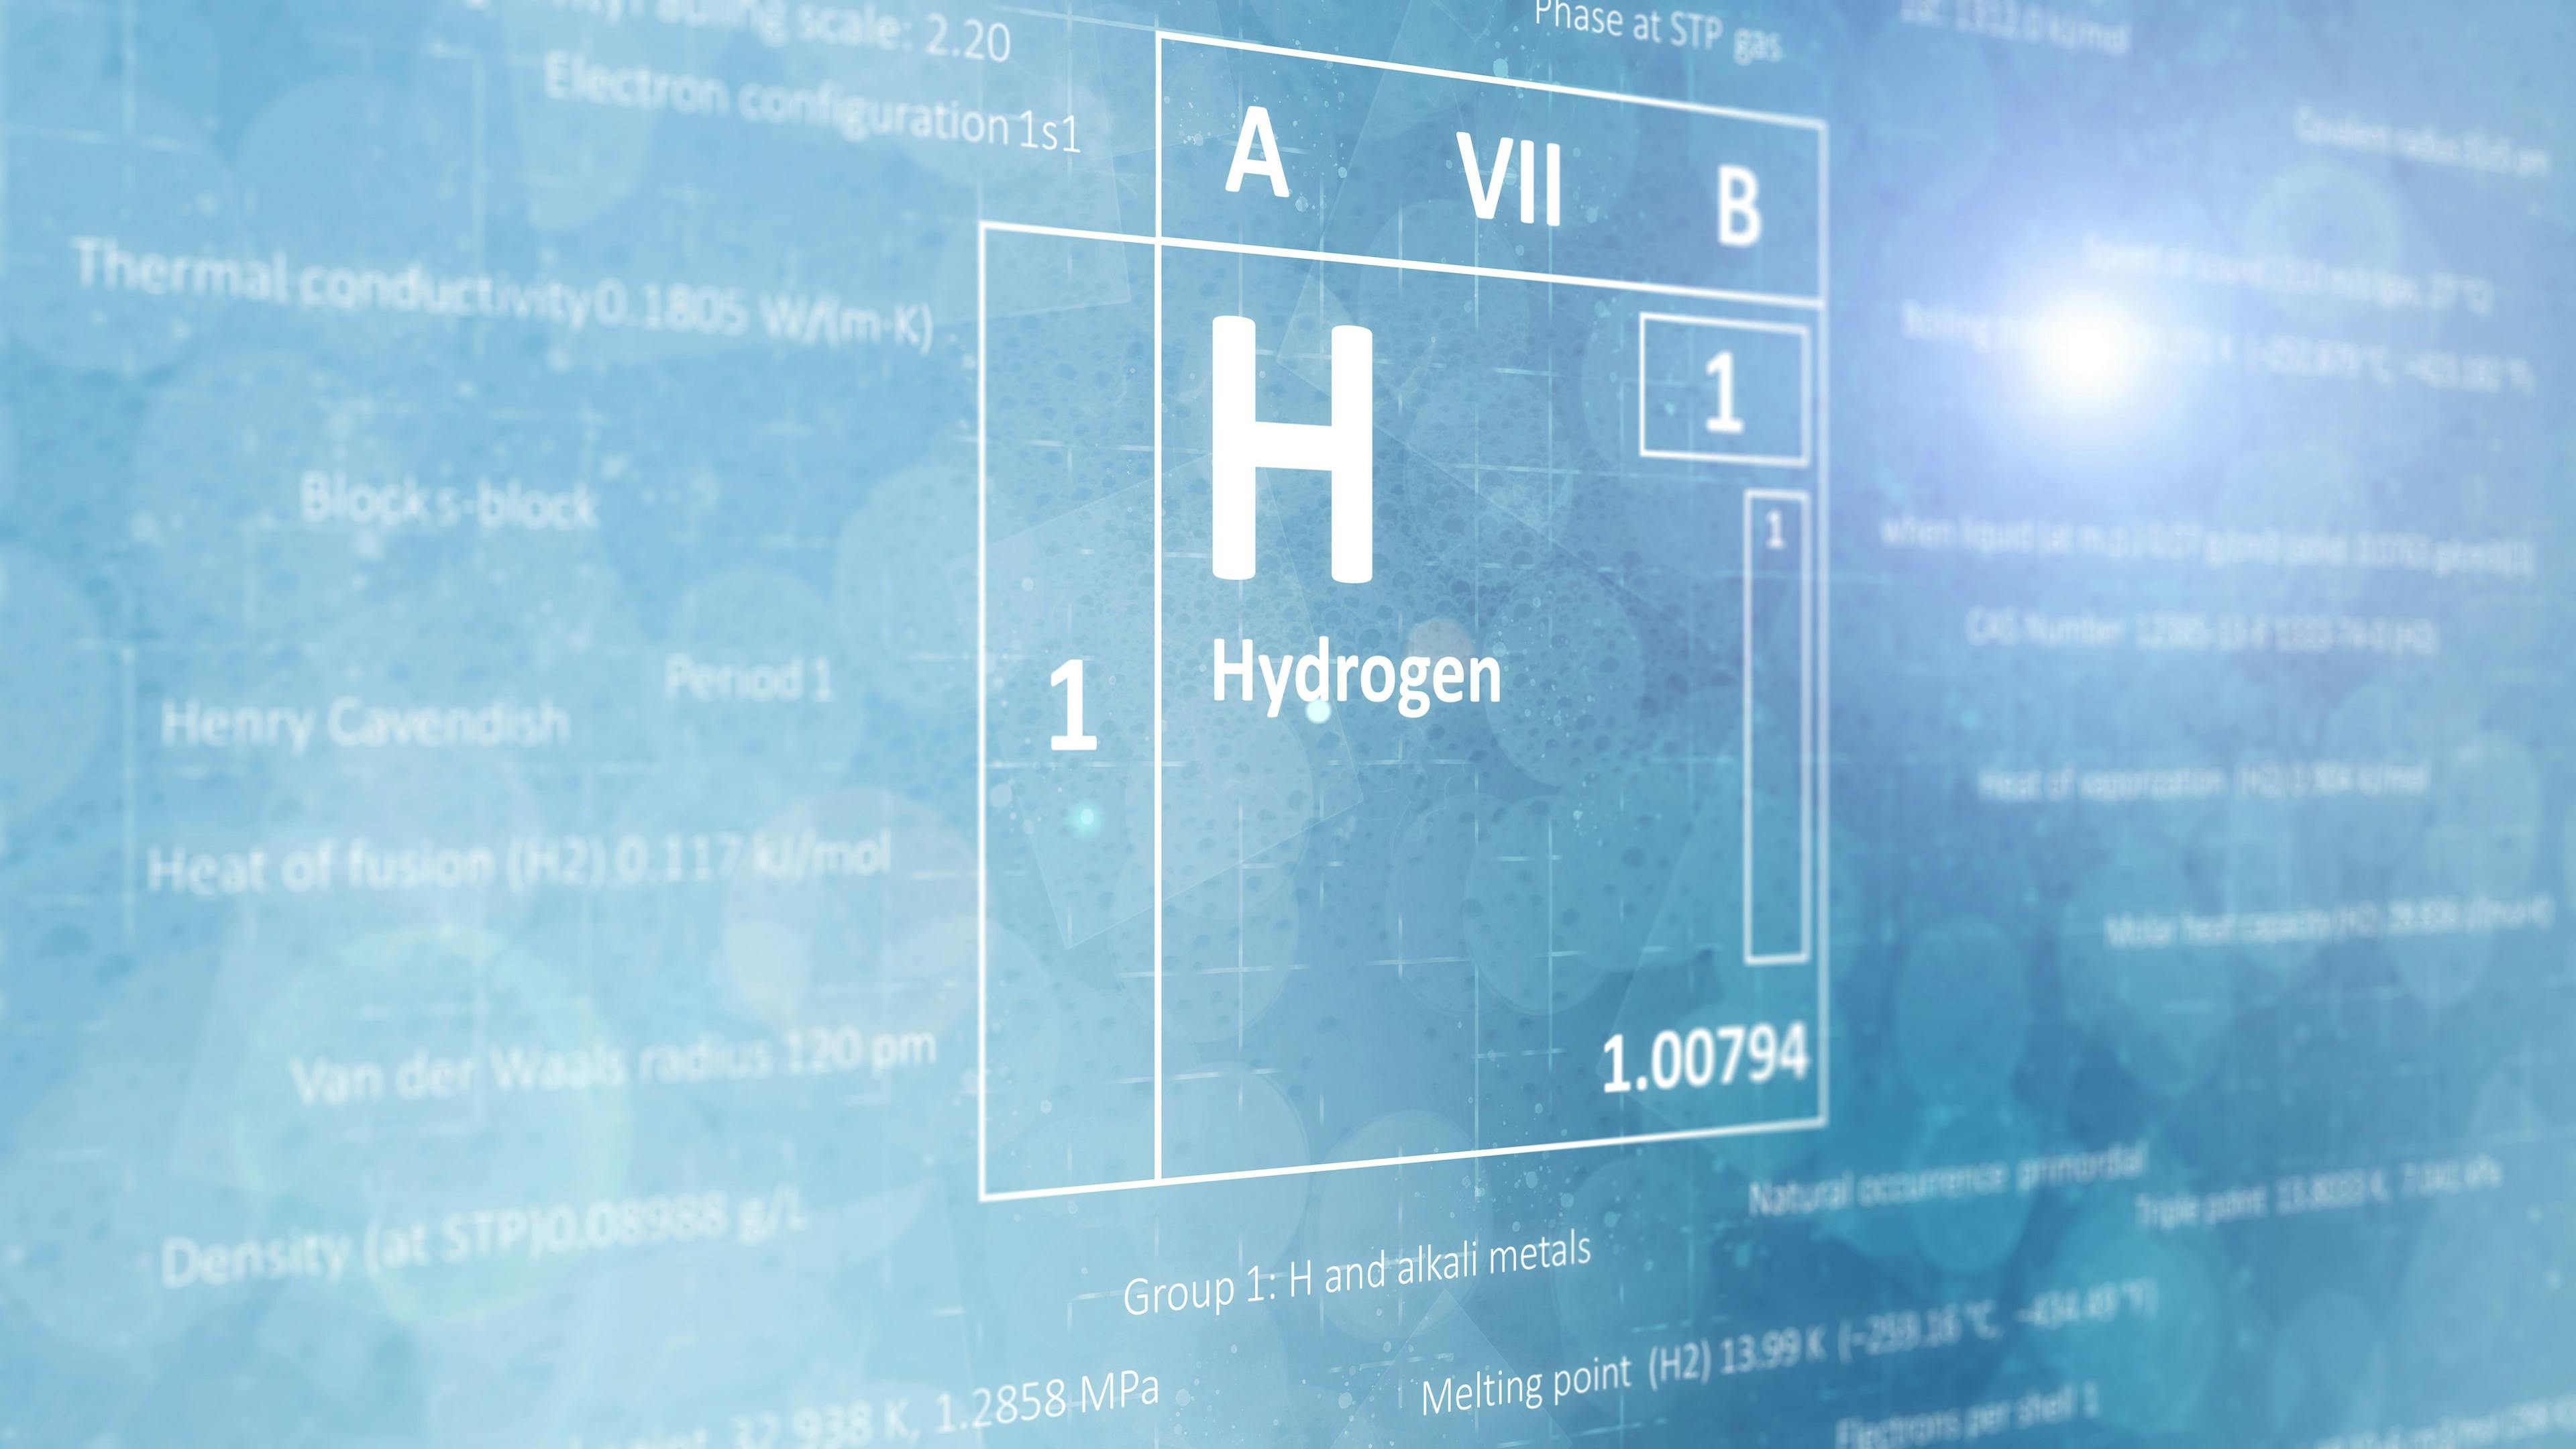 Elemental hydrogen concept from the periodic table of chemical elements. Light blue background. | Image Credit: © Issah - stock.adobe.com